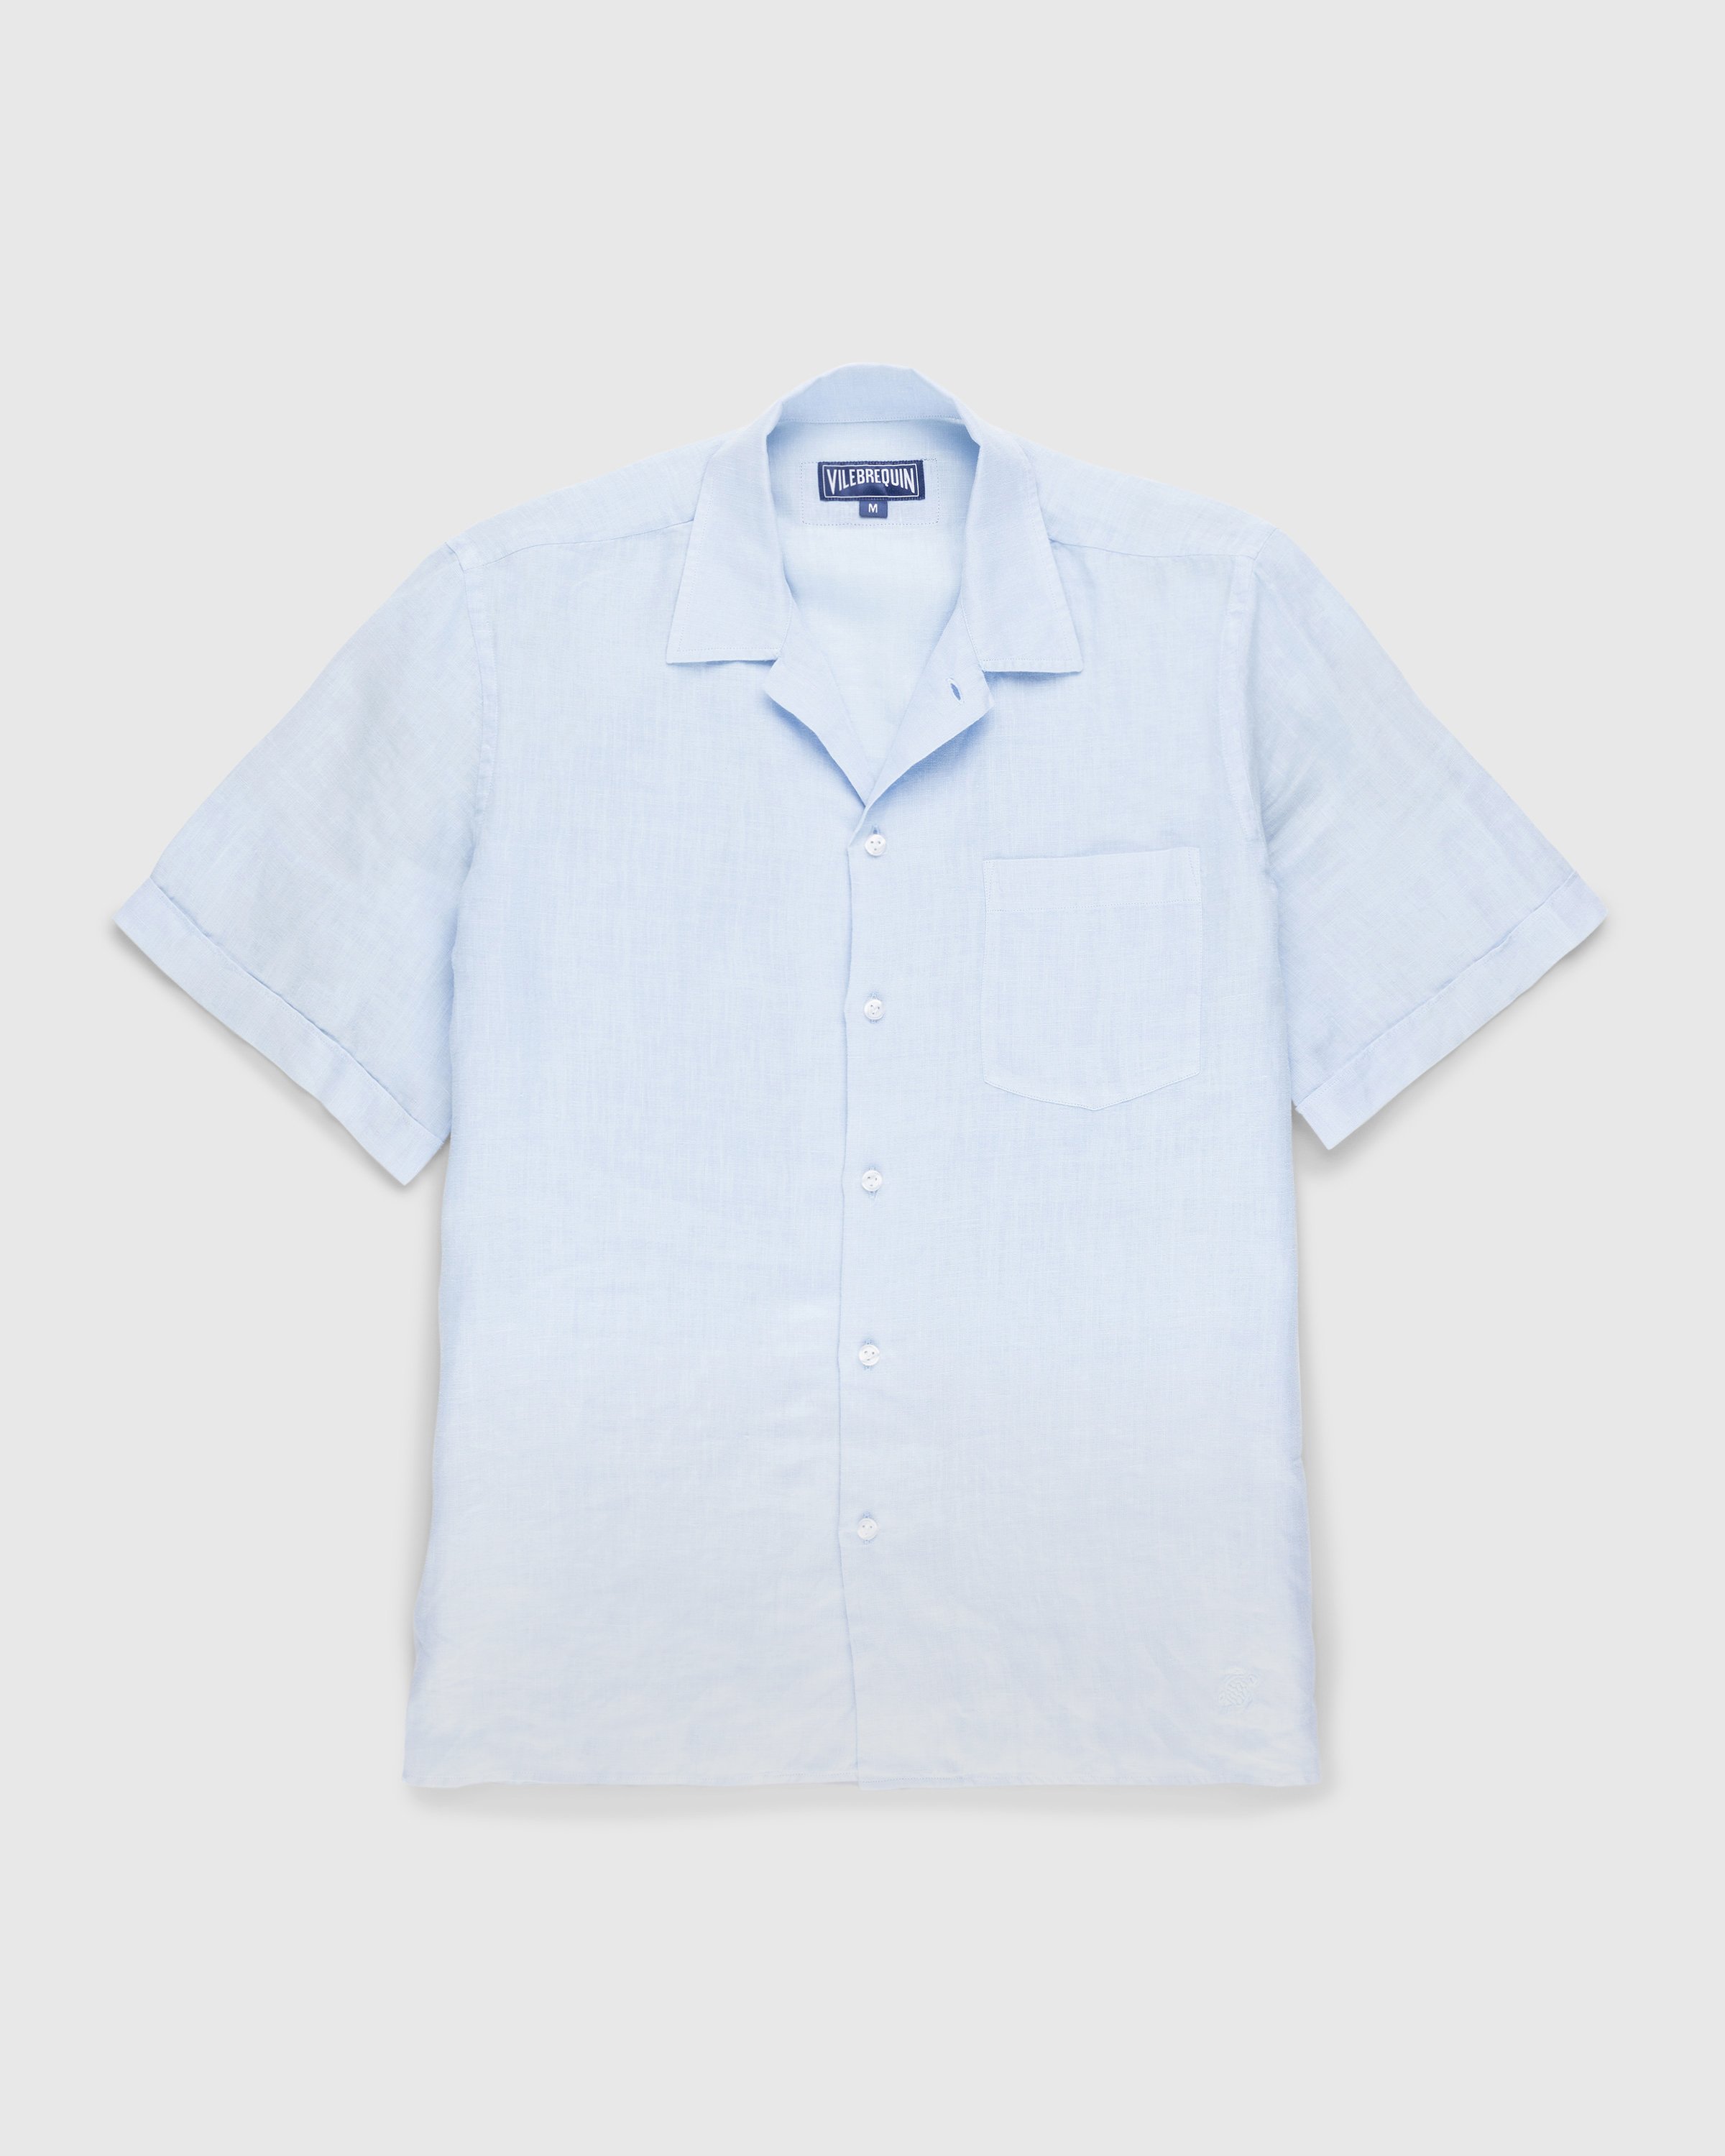 Vilebrequin x Highsnobiety - Solid Bowling Shirt Chambray - Clothing - Blue - Image 1